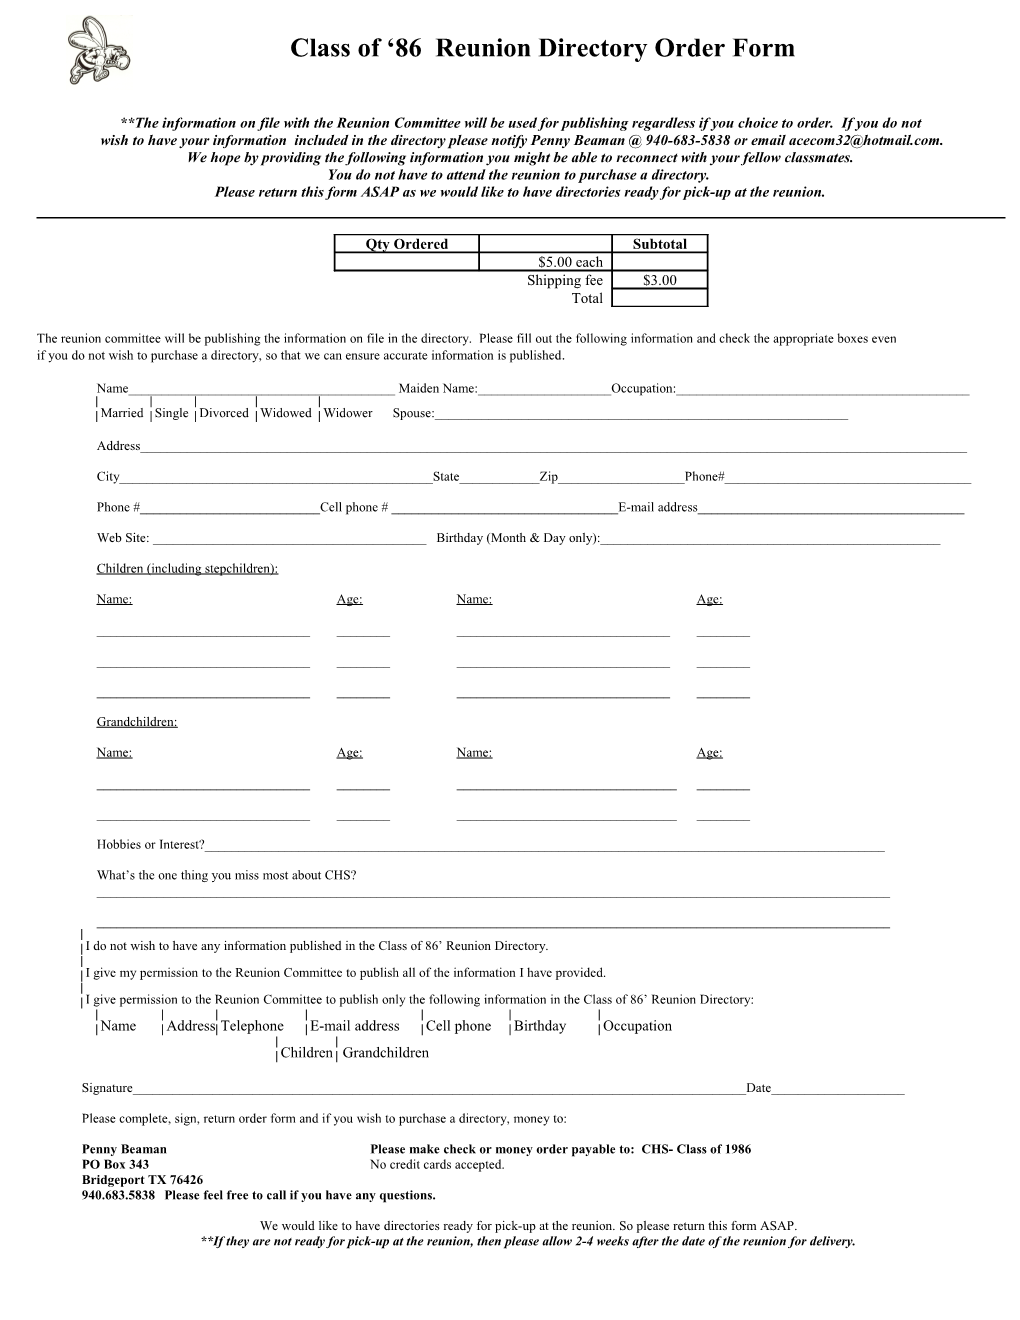 Class of 86 Reunion Directory Order Form